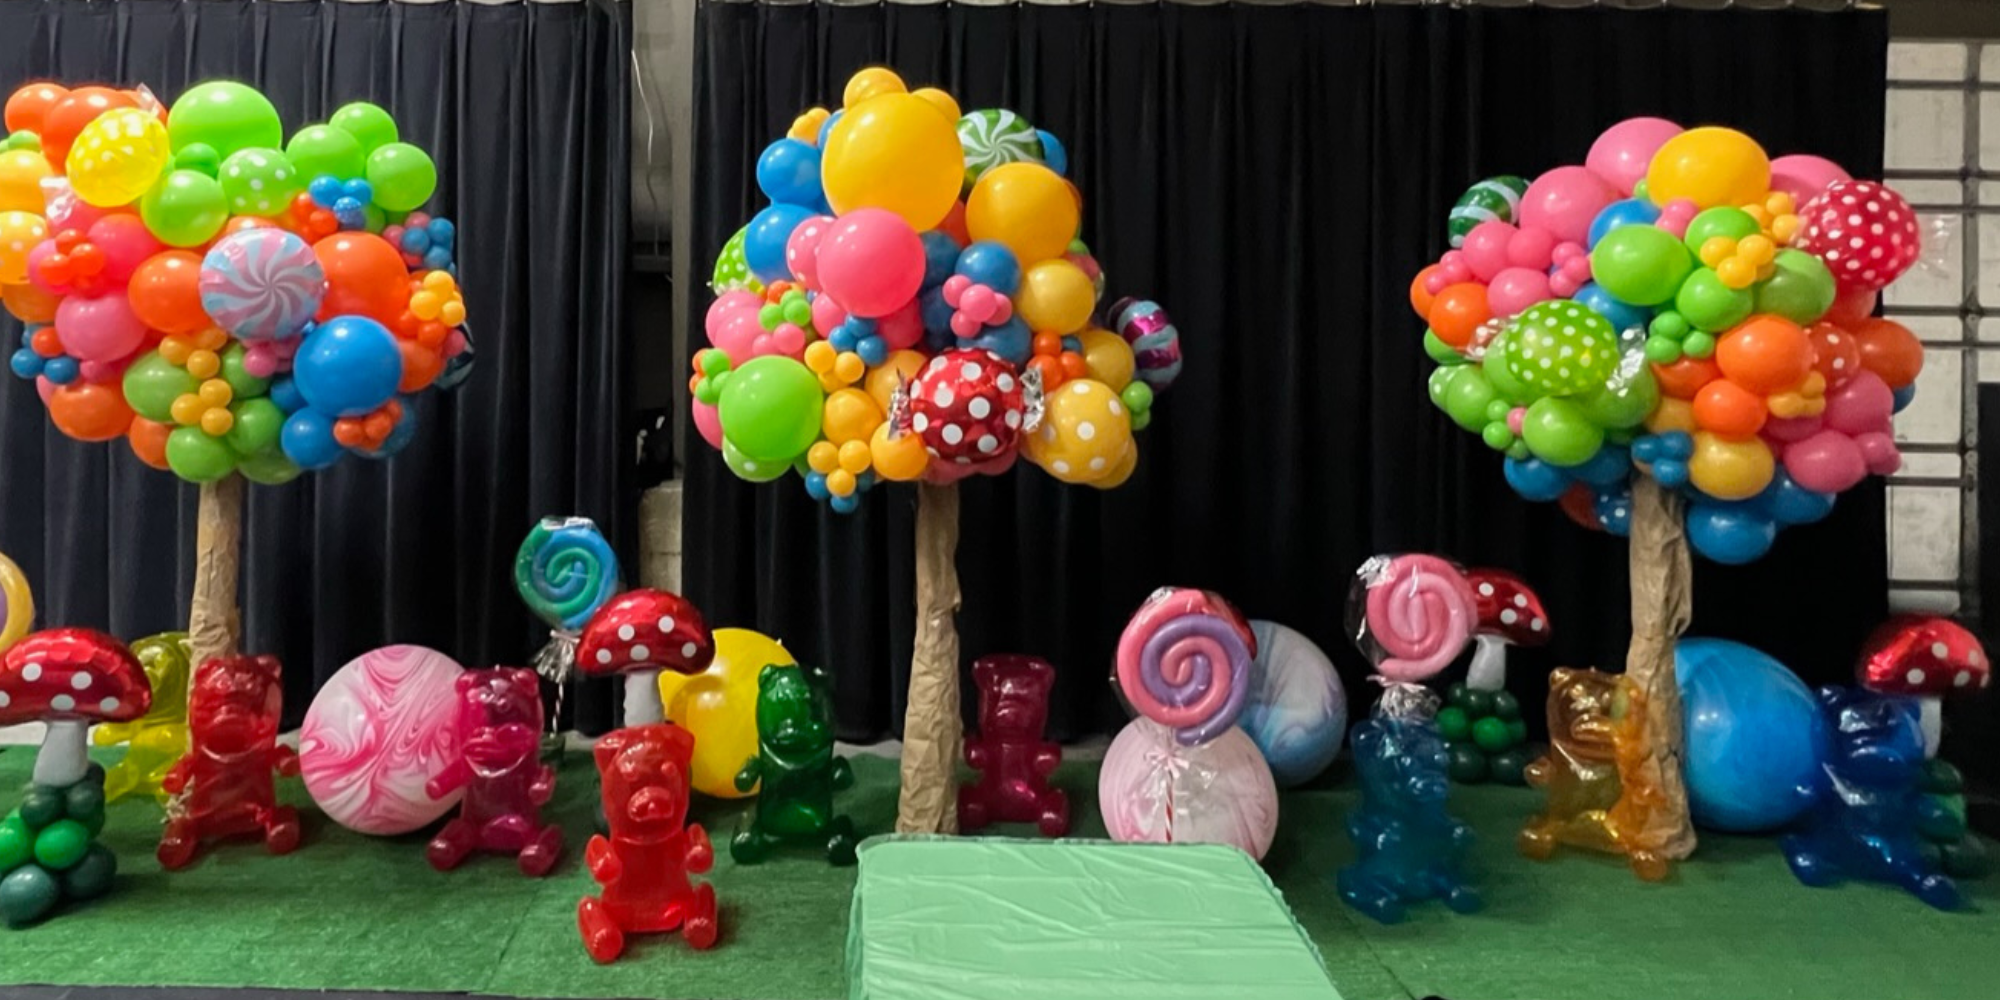 Balloon candy trees and jumbo balloon candies fill the venue for an incredible Willy Wonka themed Christmas Party in Utah.